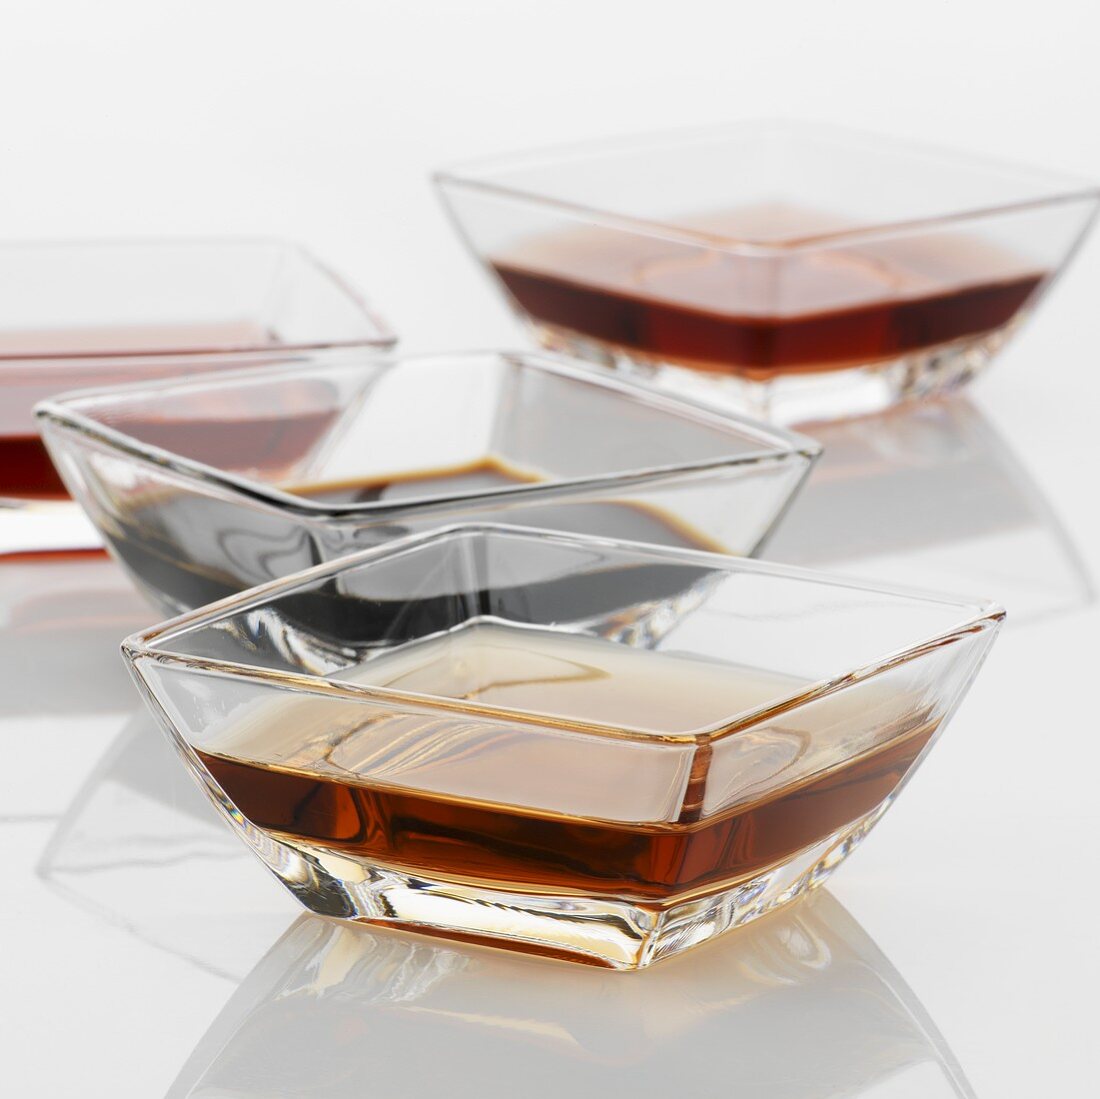 Various types of vinegar in glass dishes